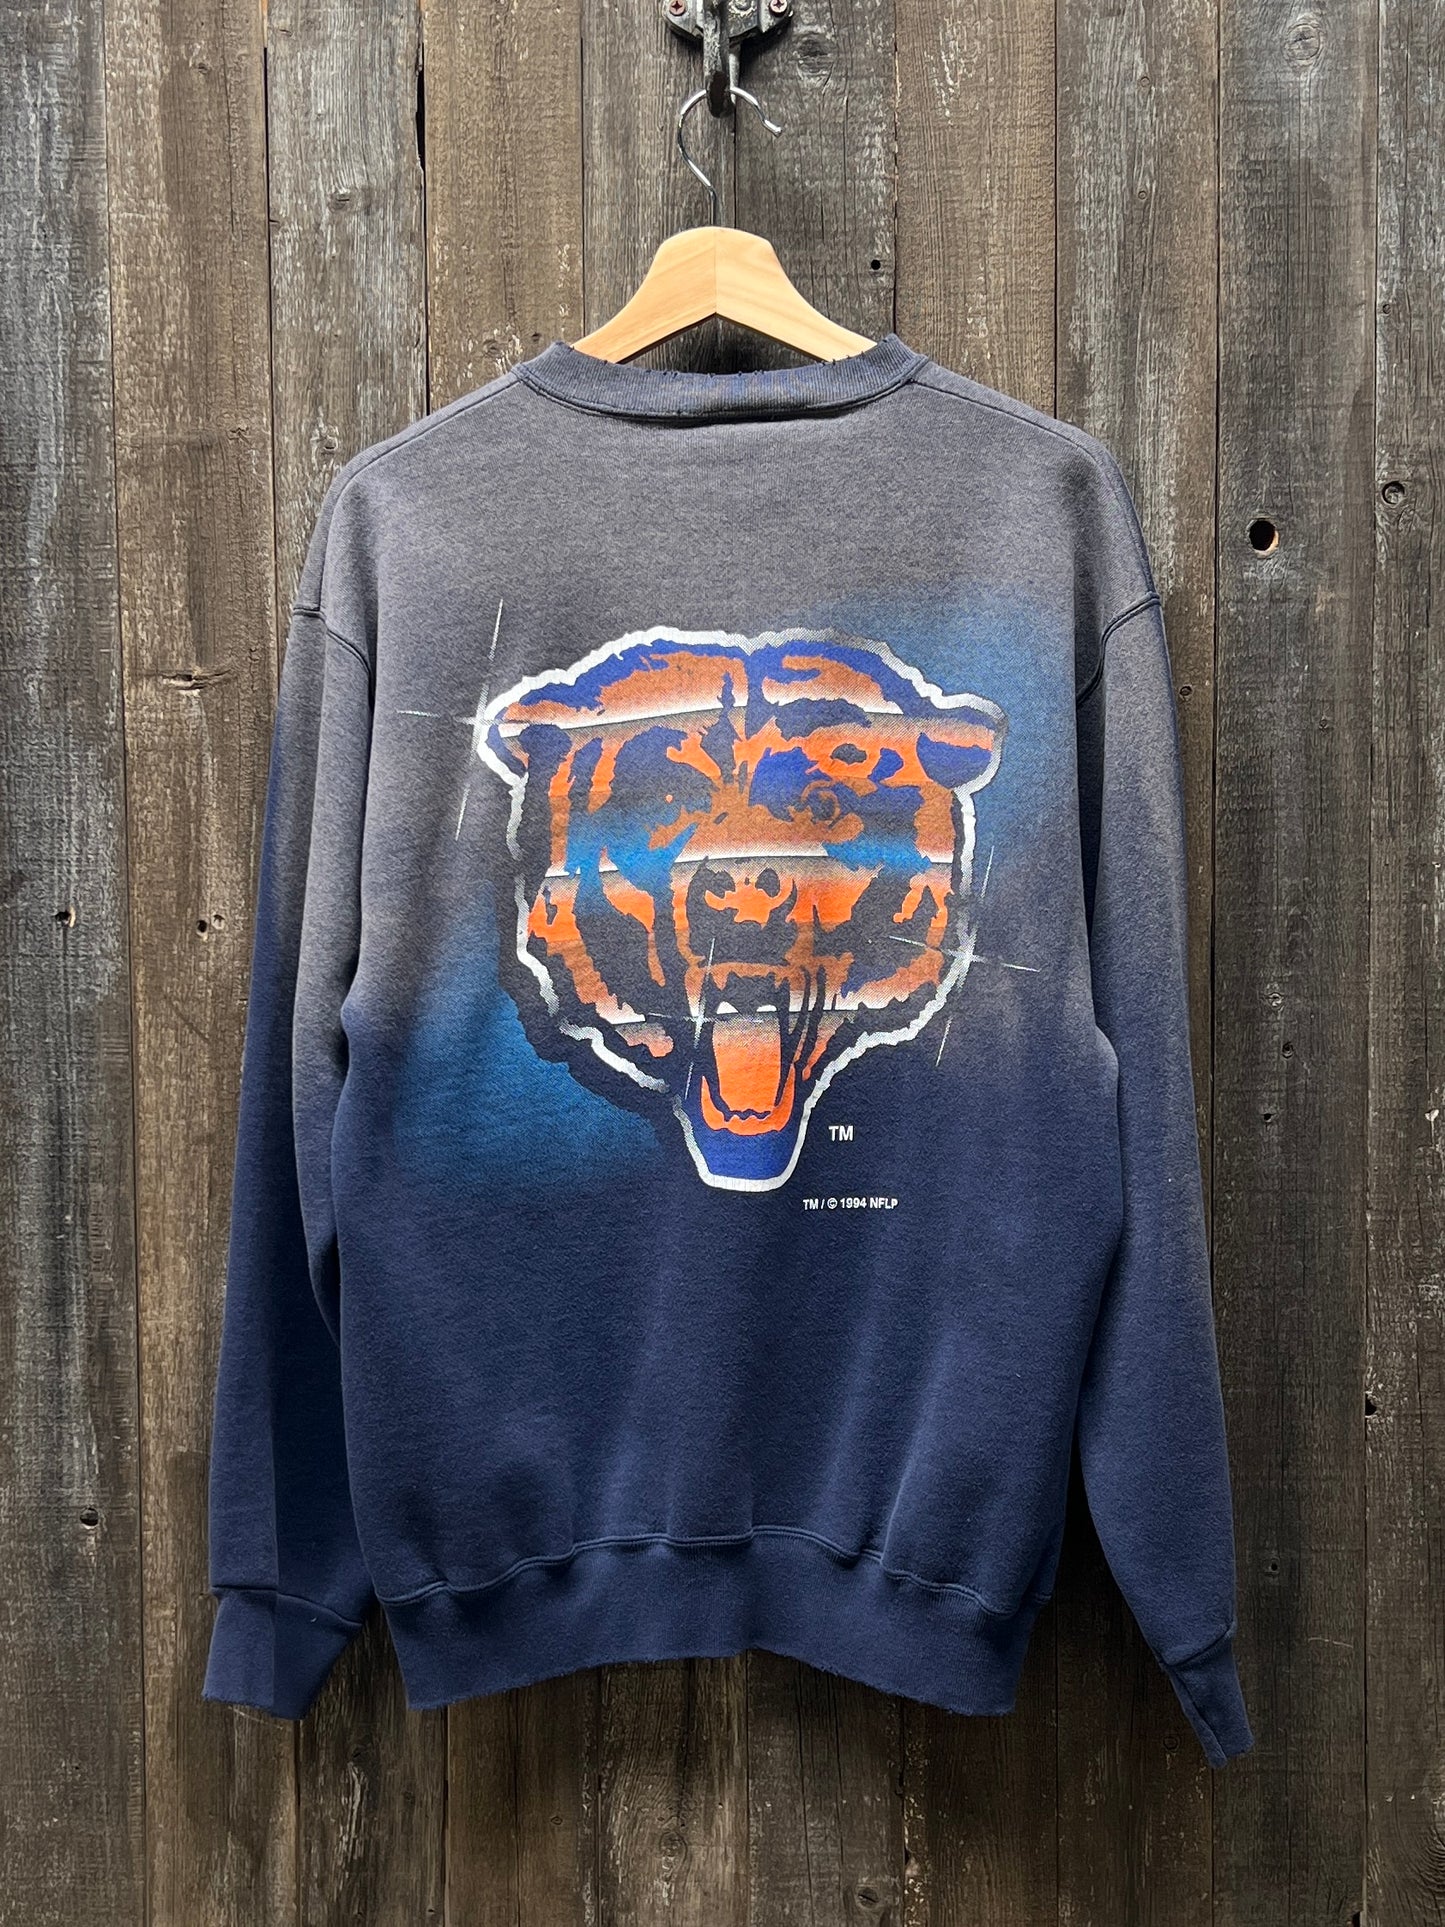 Chicago Bears Sweatshirt - M/L-Customize Your Embroidery Wording